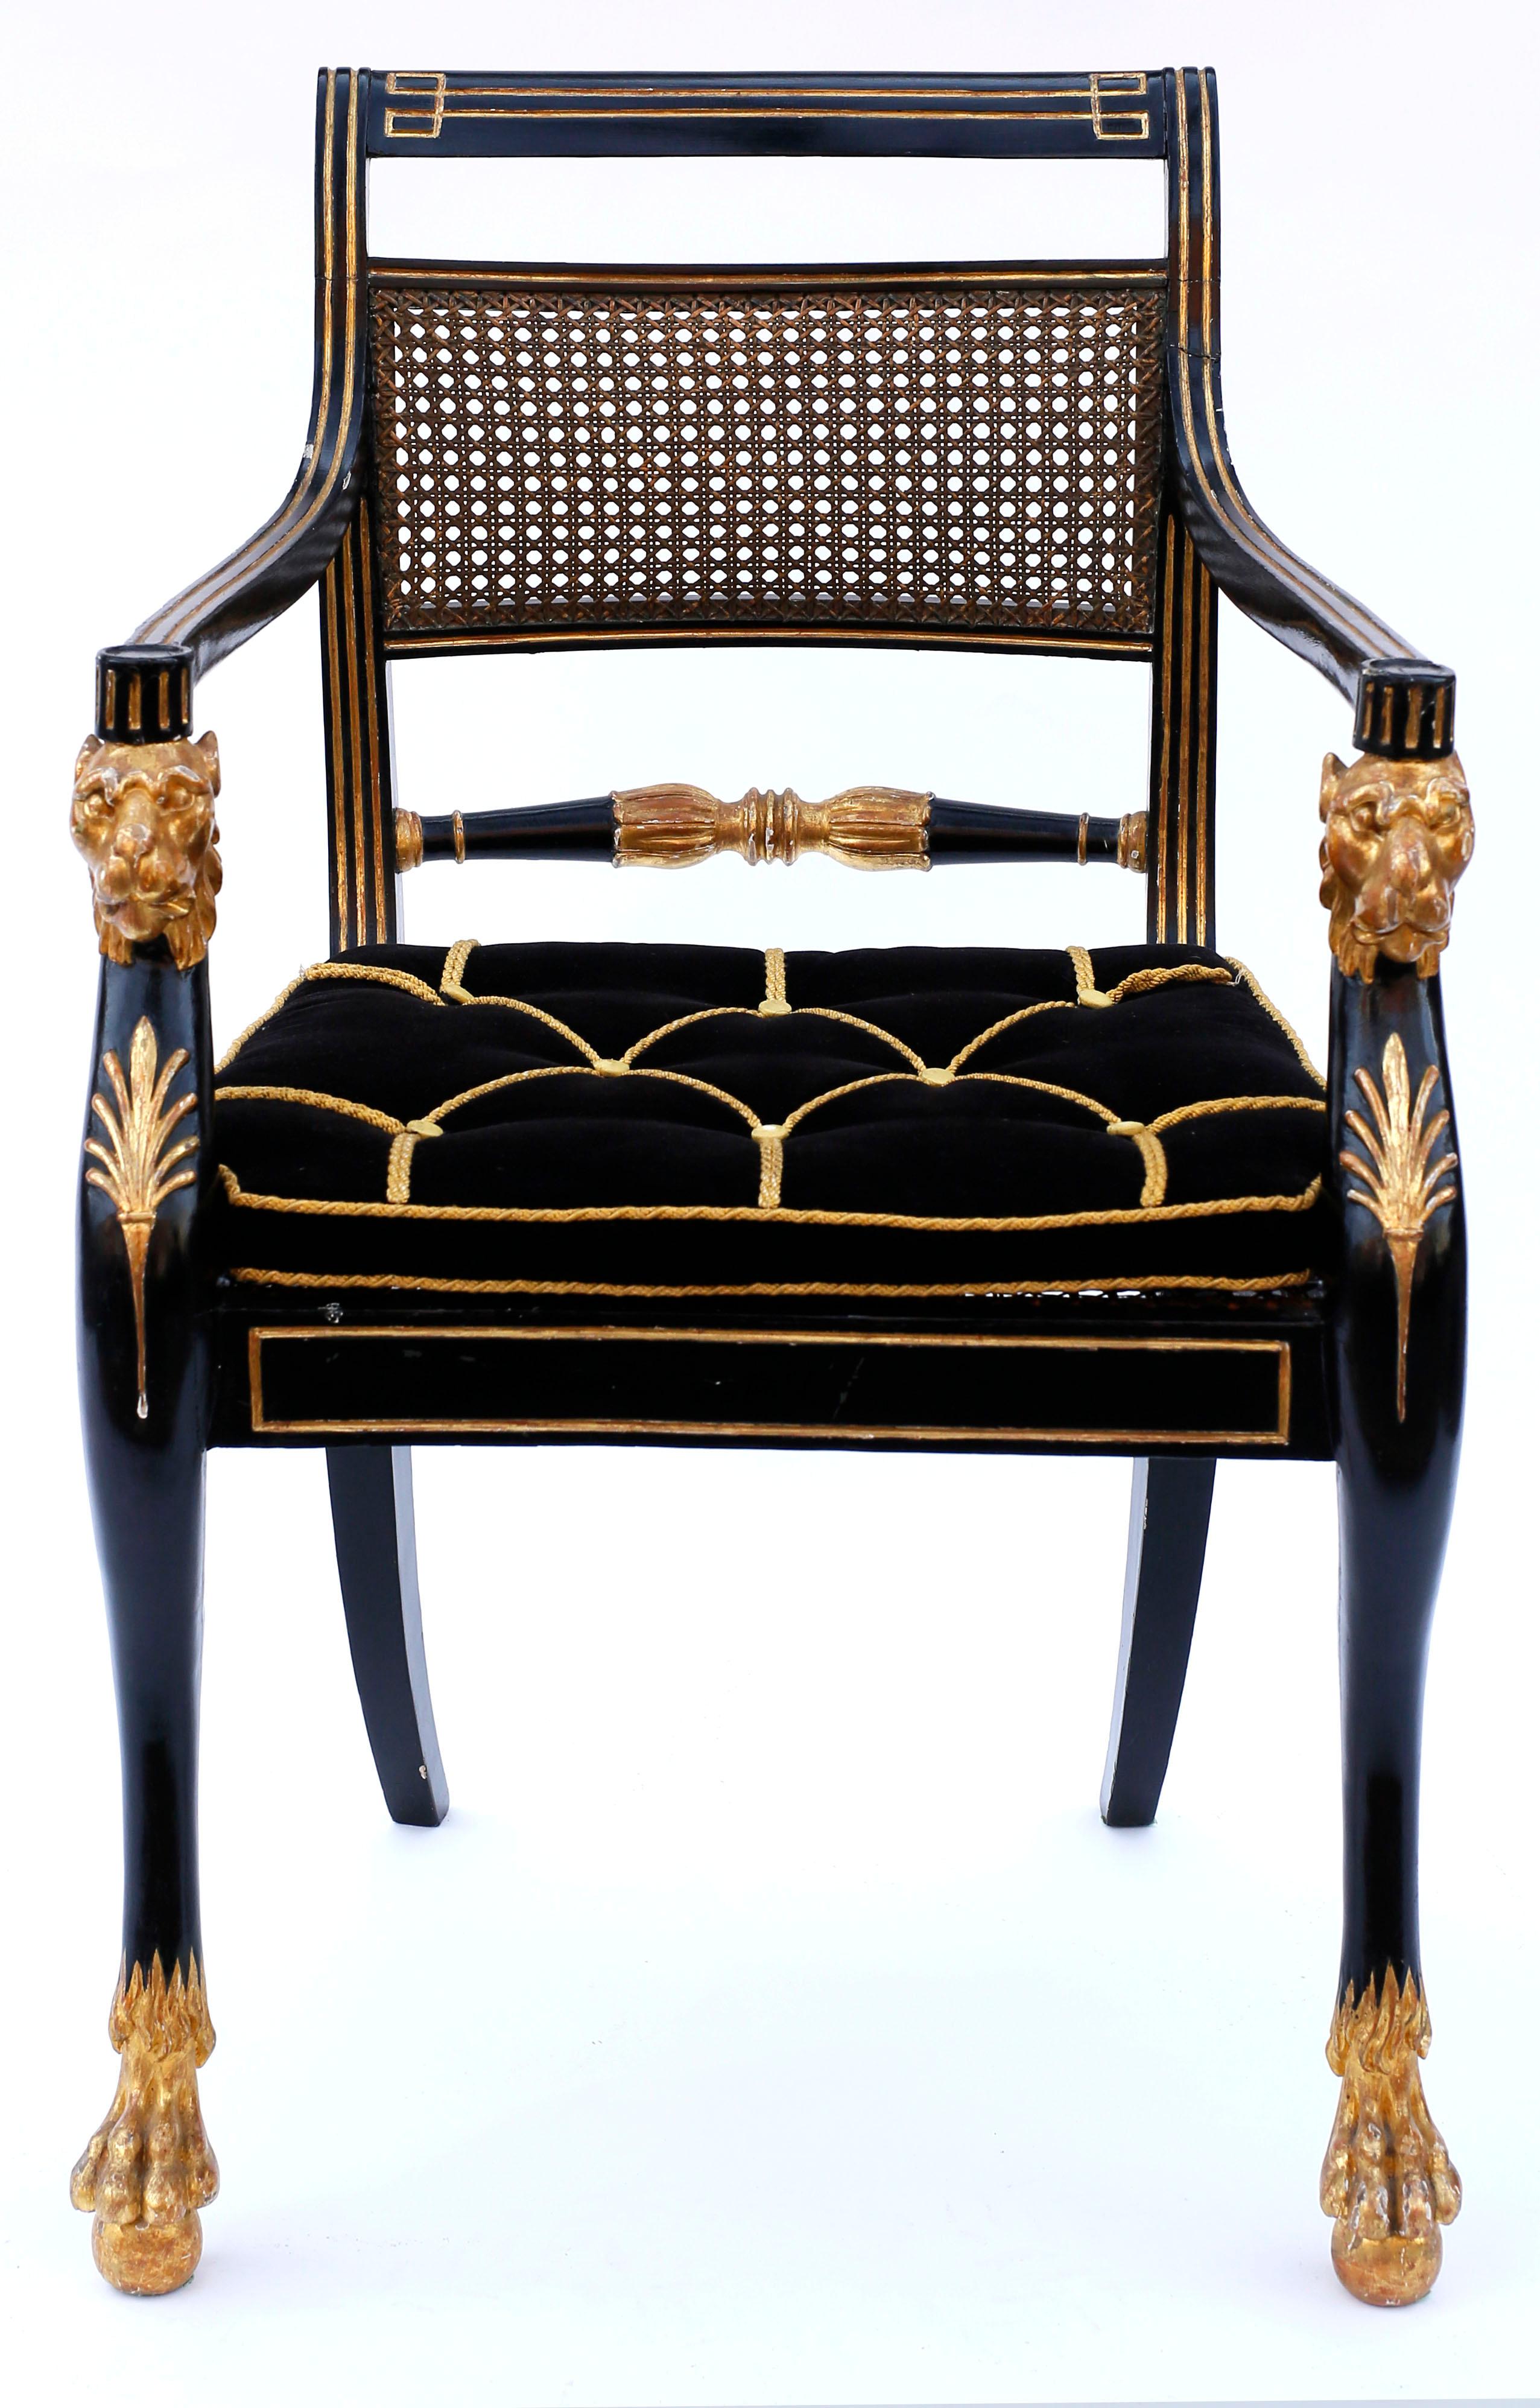 Regency Pair of Early 19th Century English Parcel-Gilt Armchairs by Gillows